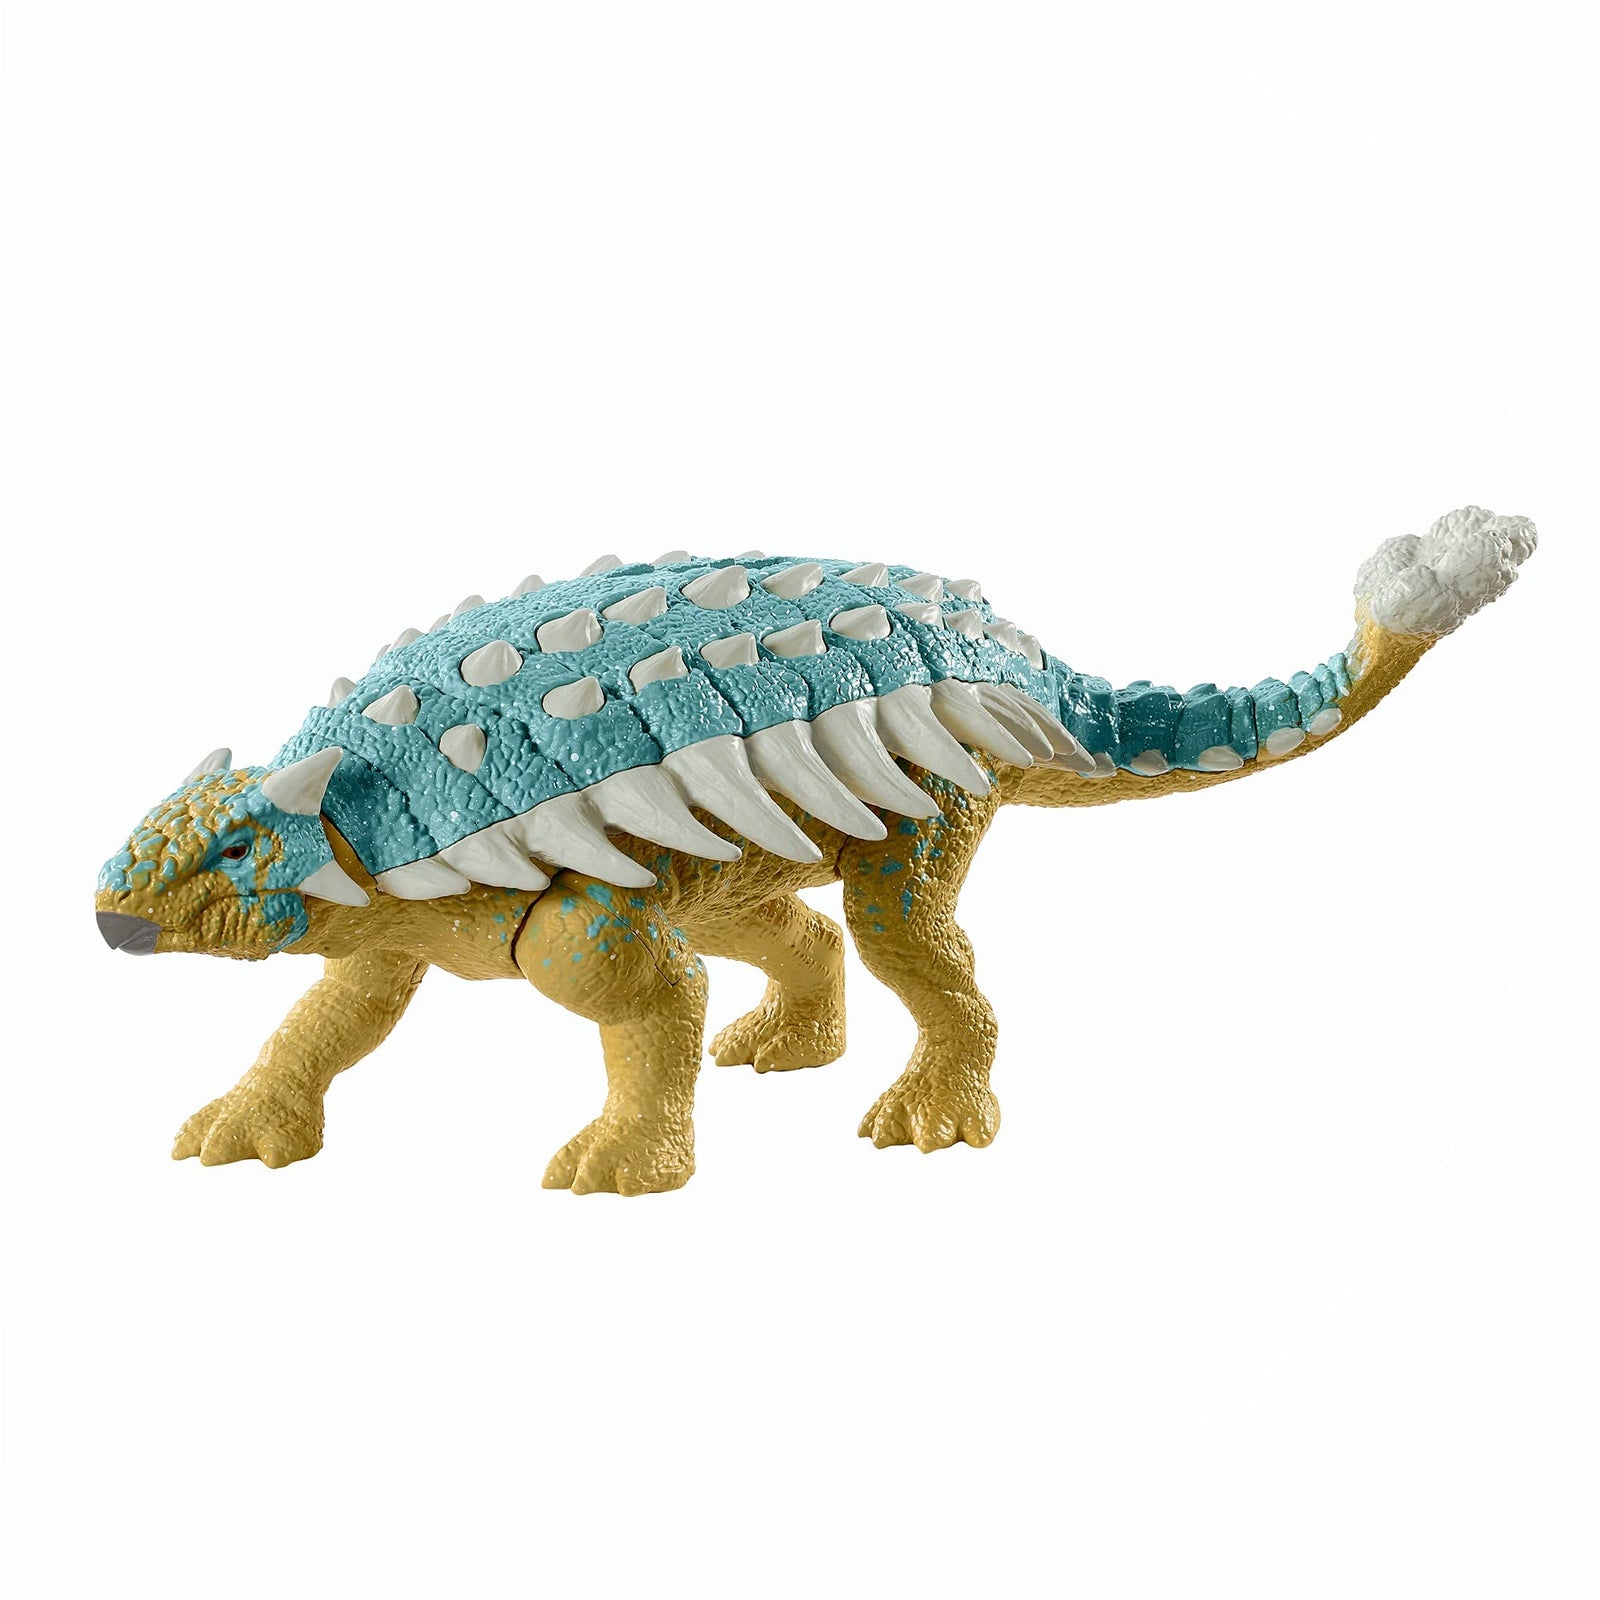 Jurassic World Roar Attack Ankylosaurus Bumpy Camp Cretaceous Dinosaur Figure with Movable Joints, Realistic Sculpting, Strike Feature & Sounds, Herbivore, Kids Gift 4 Years & Up